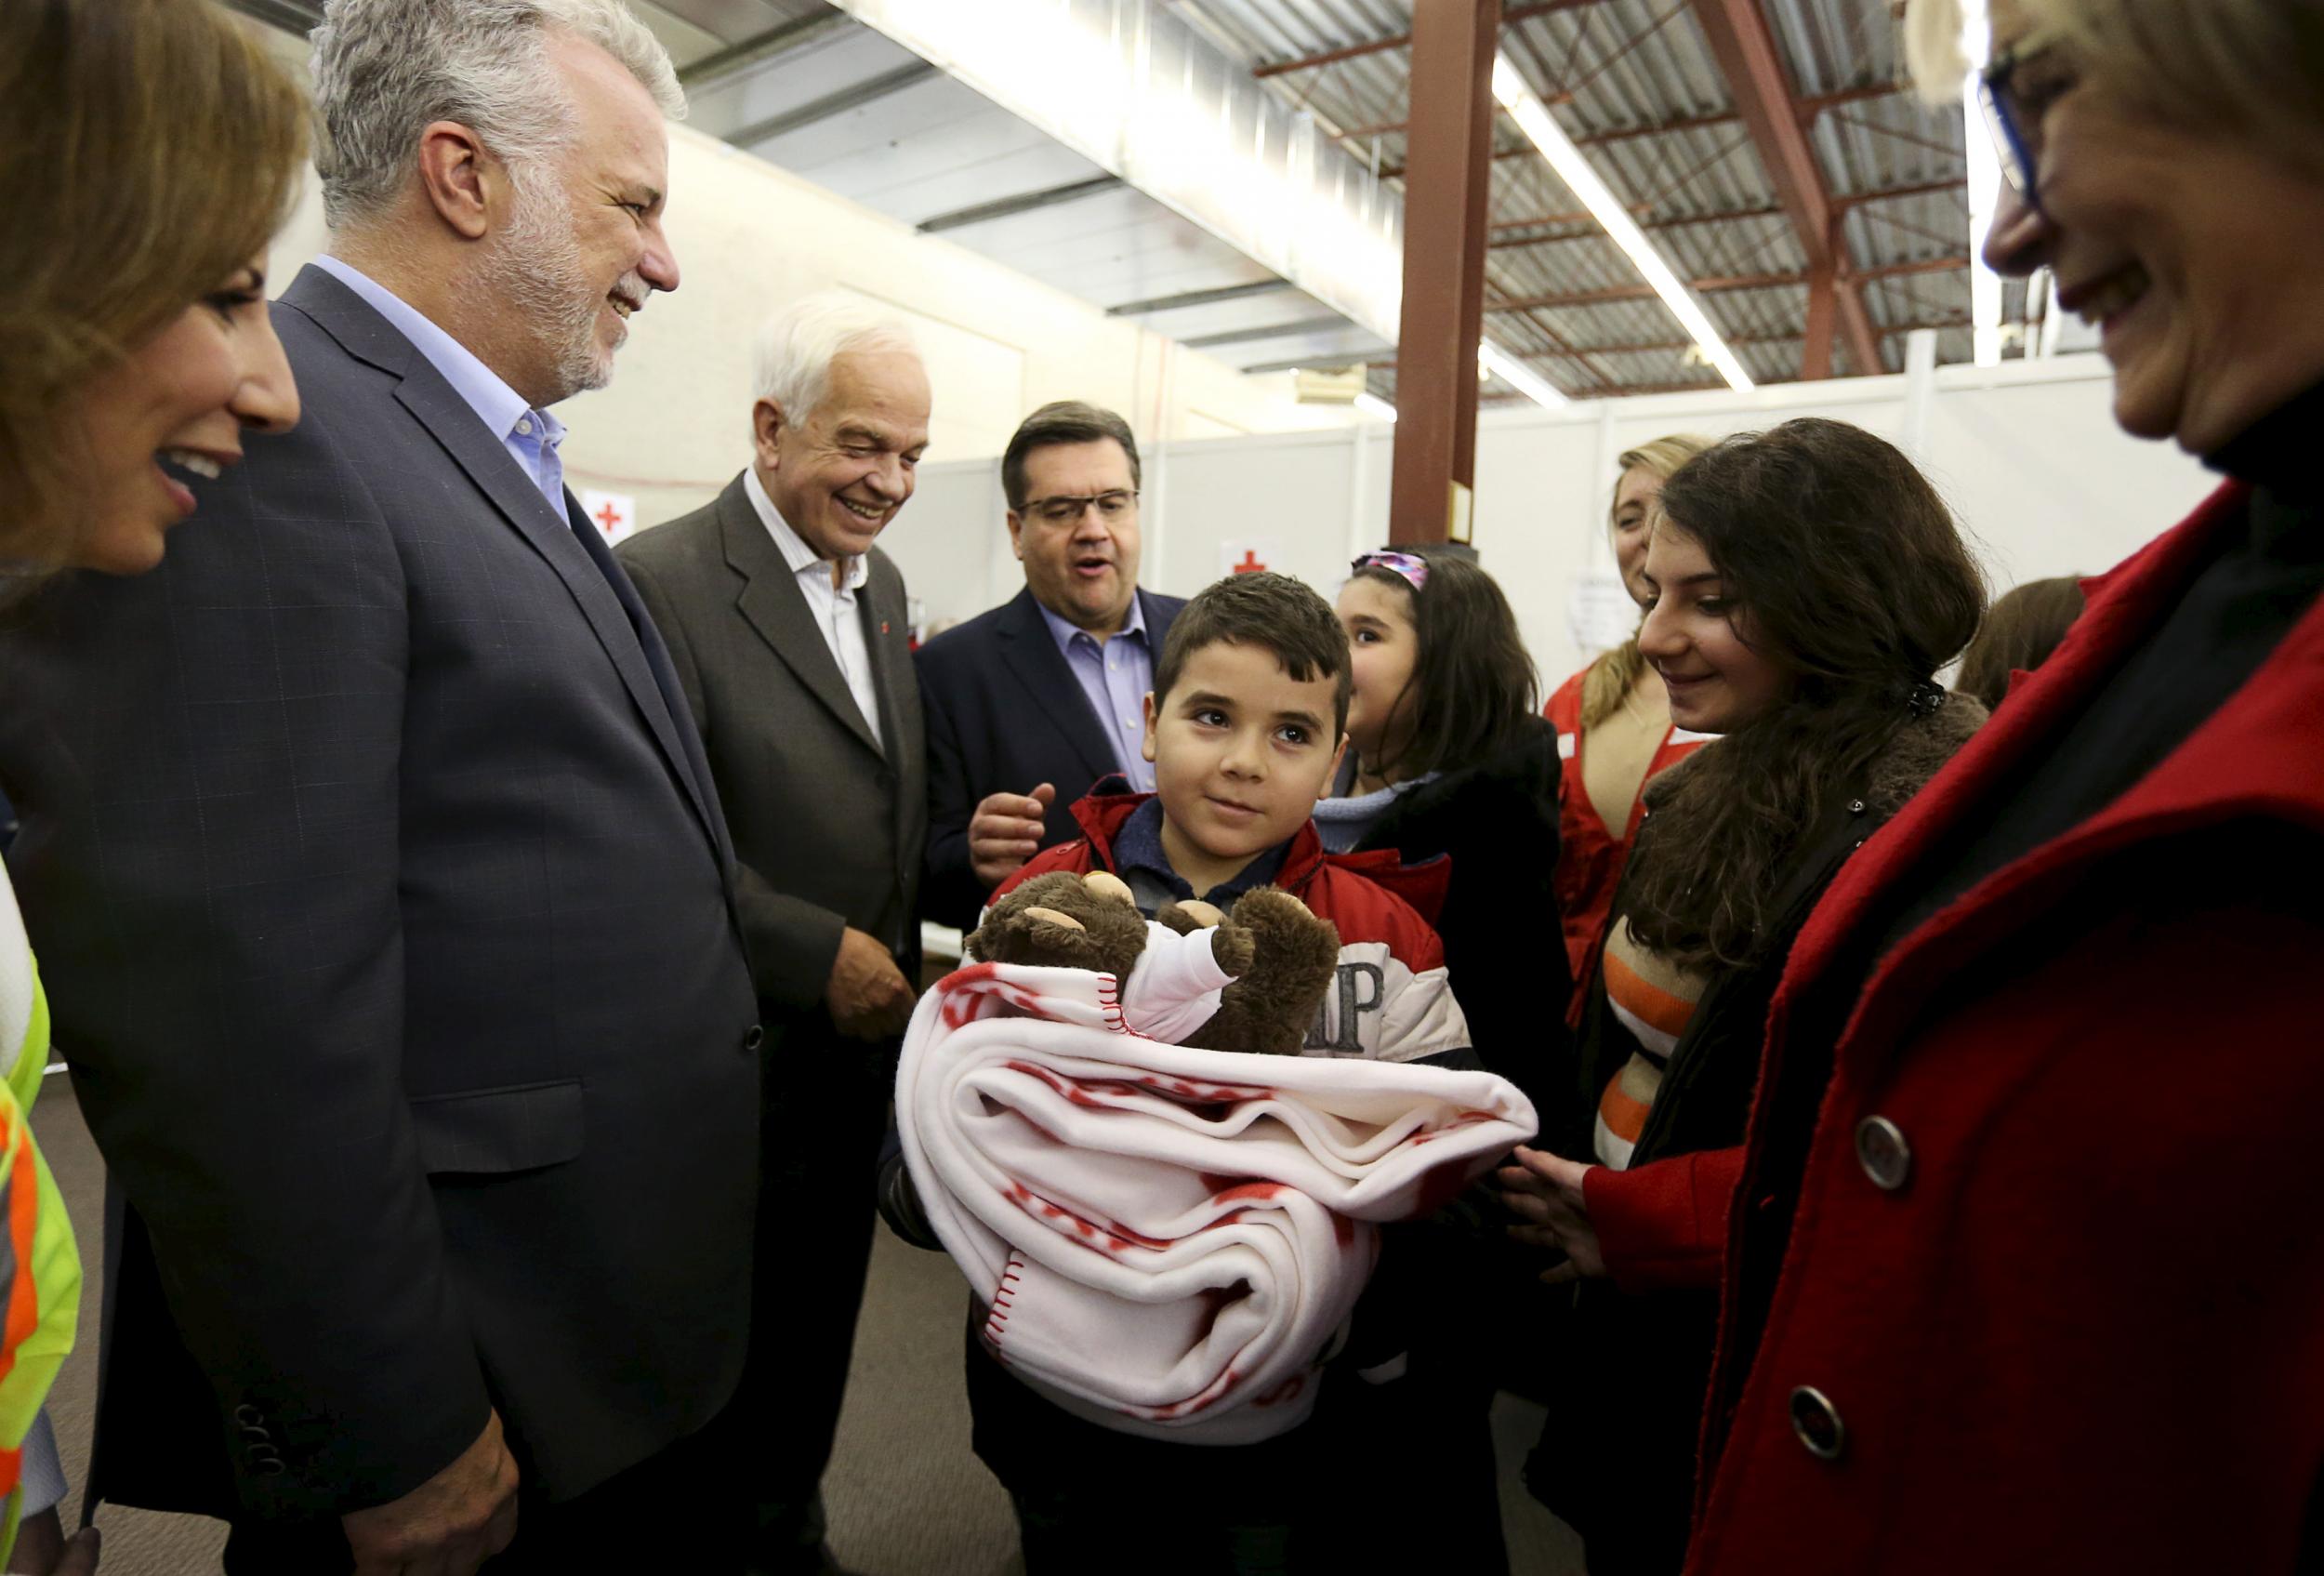 Canada's Immigration Minister John McCallum welcoming Syrian refugees at the Welcome Centre in Montreal, Quebec